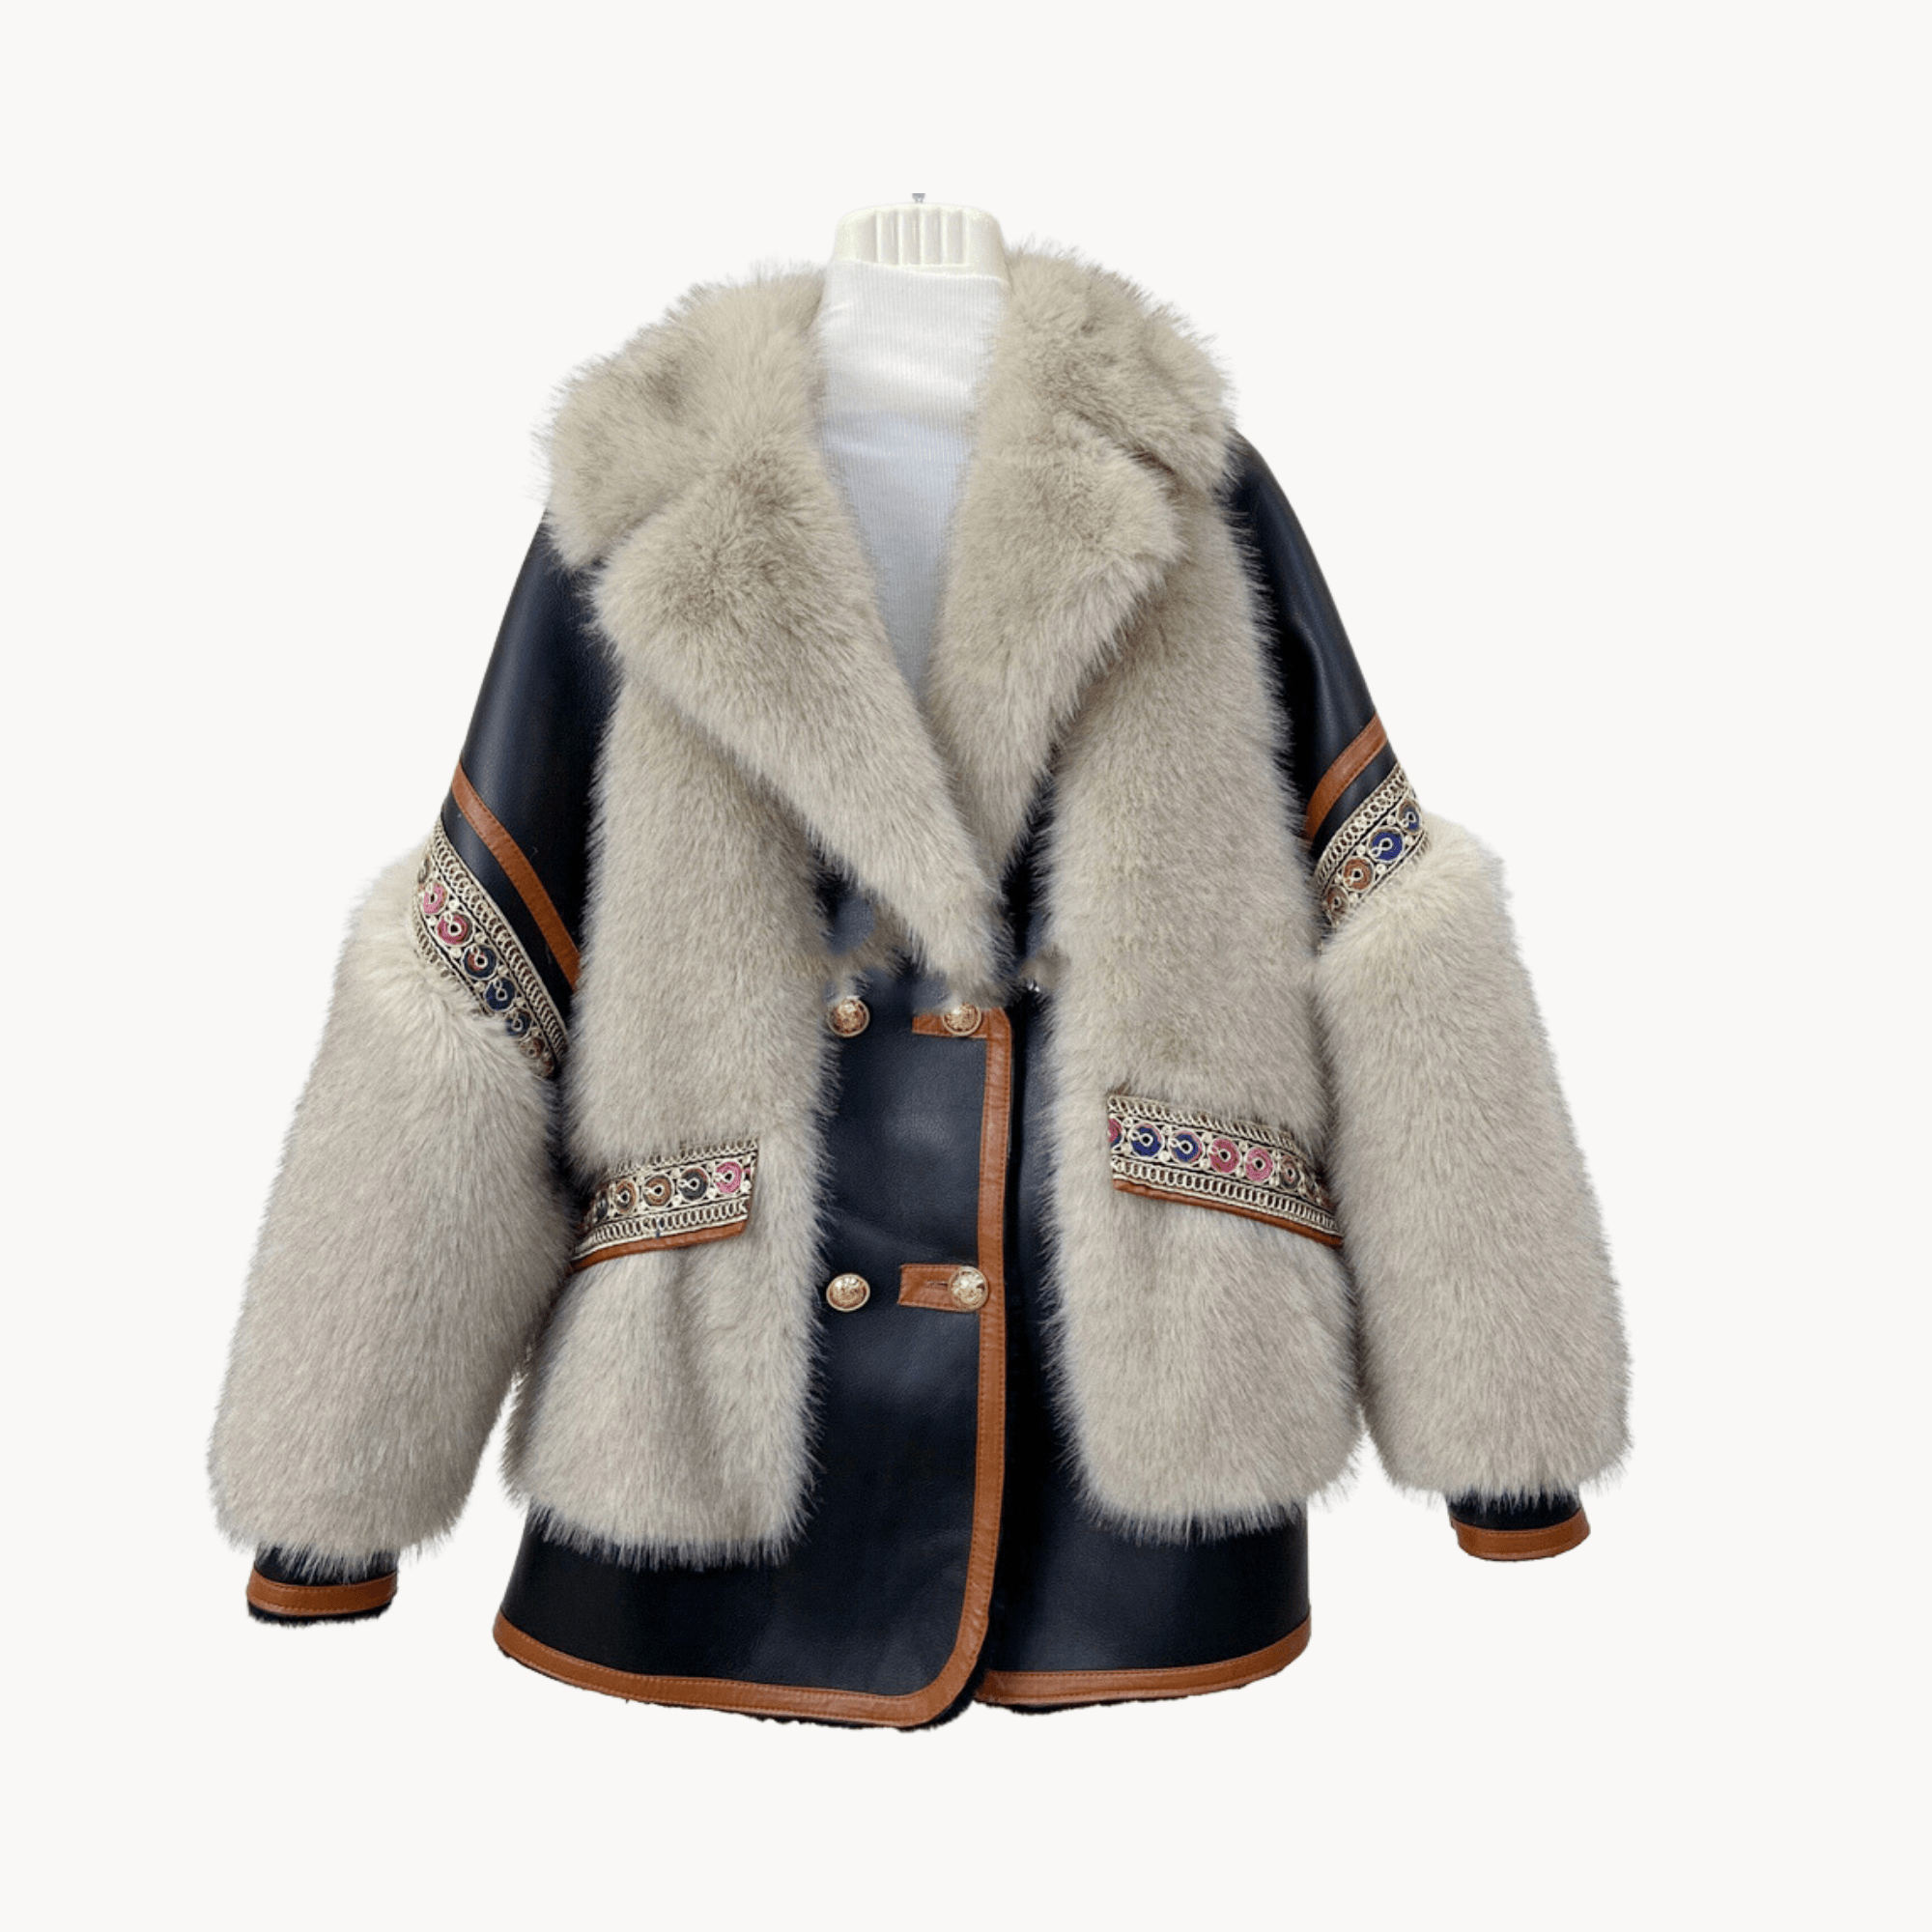 Embroidered Accents Faux Jacket - Kelly Obi New York